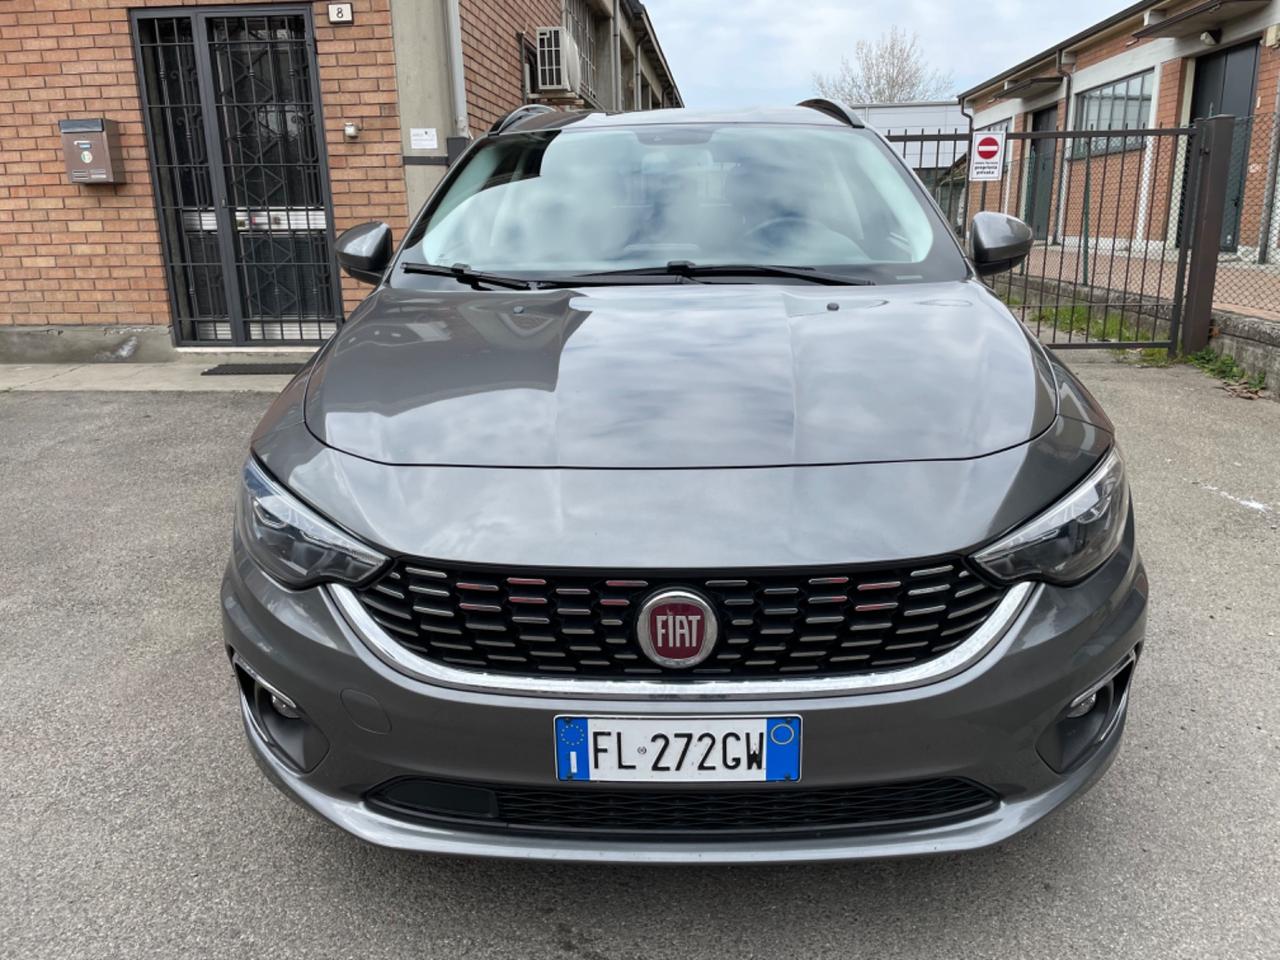 Fiat Tipo Fiat Tipo 1.6 MJT S&S SW BUSINESS 120 CV